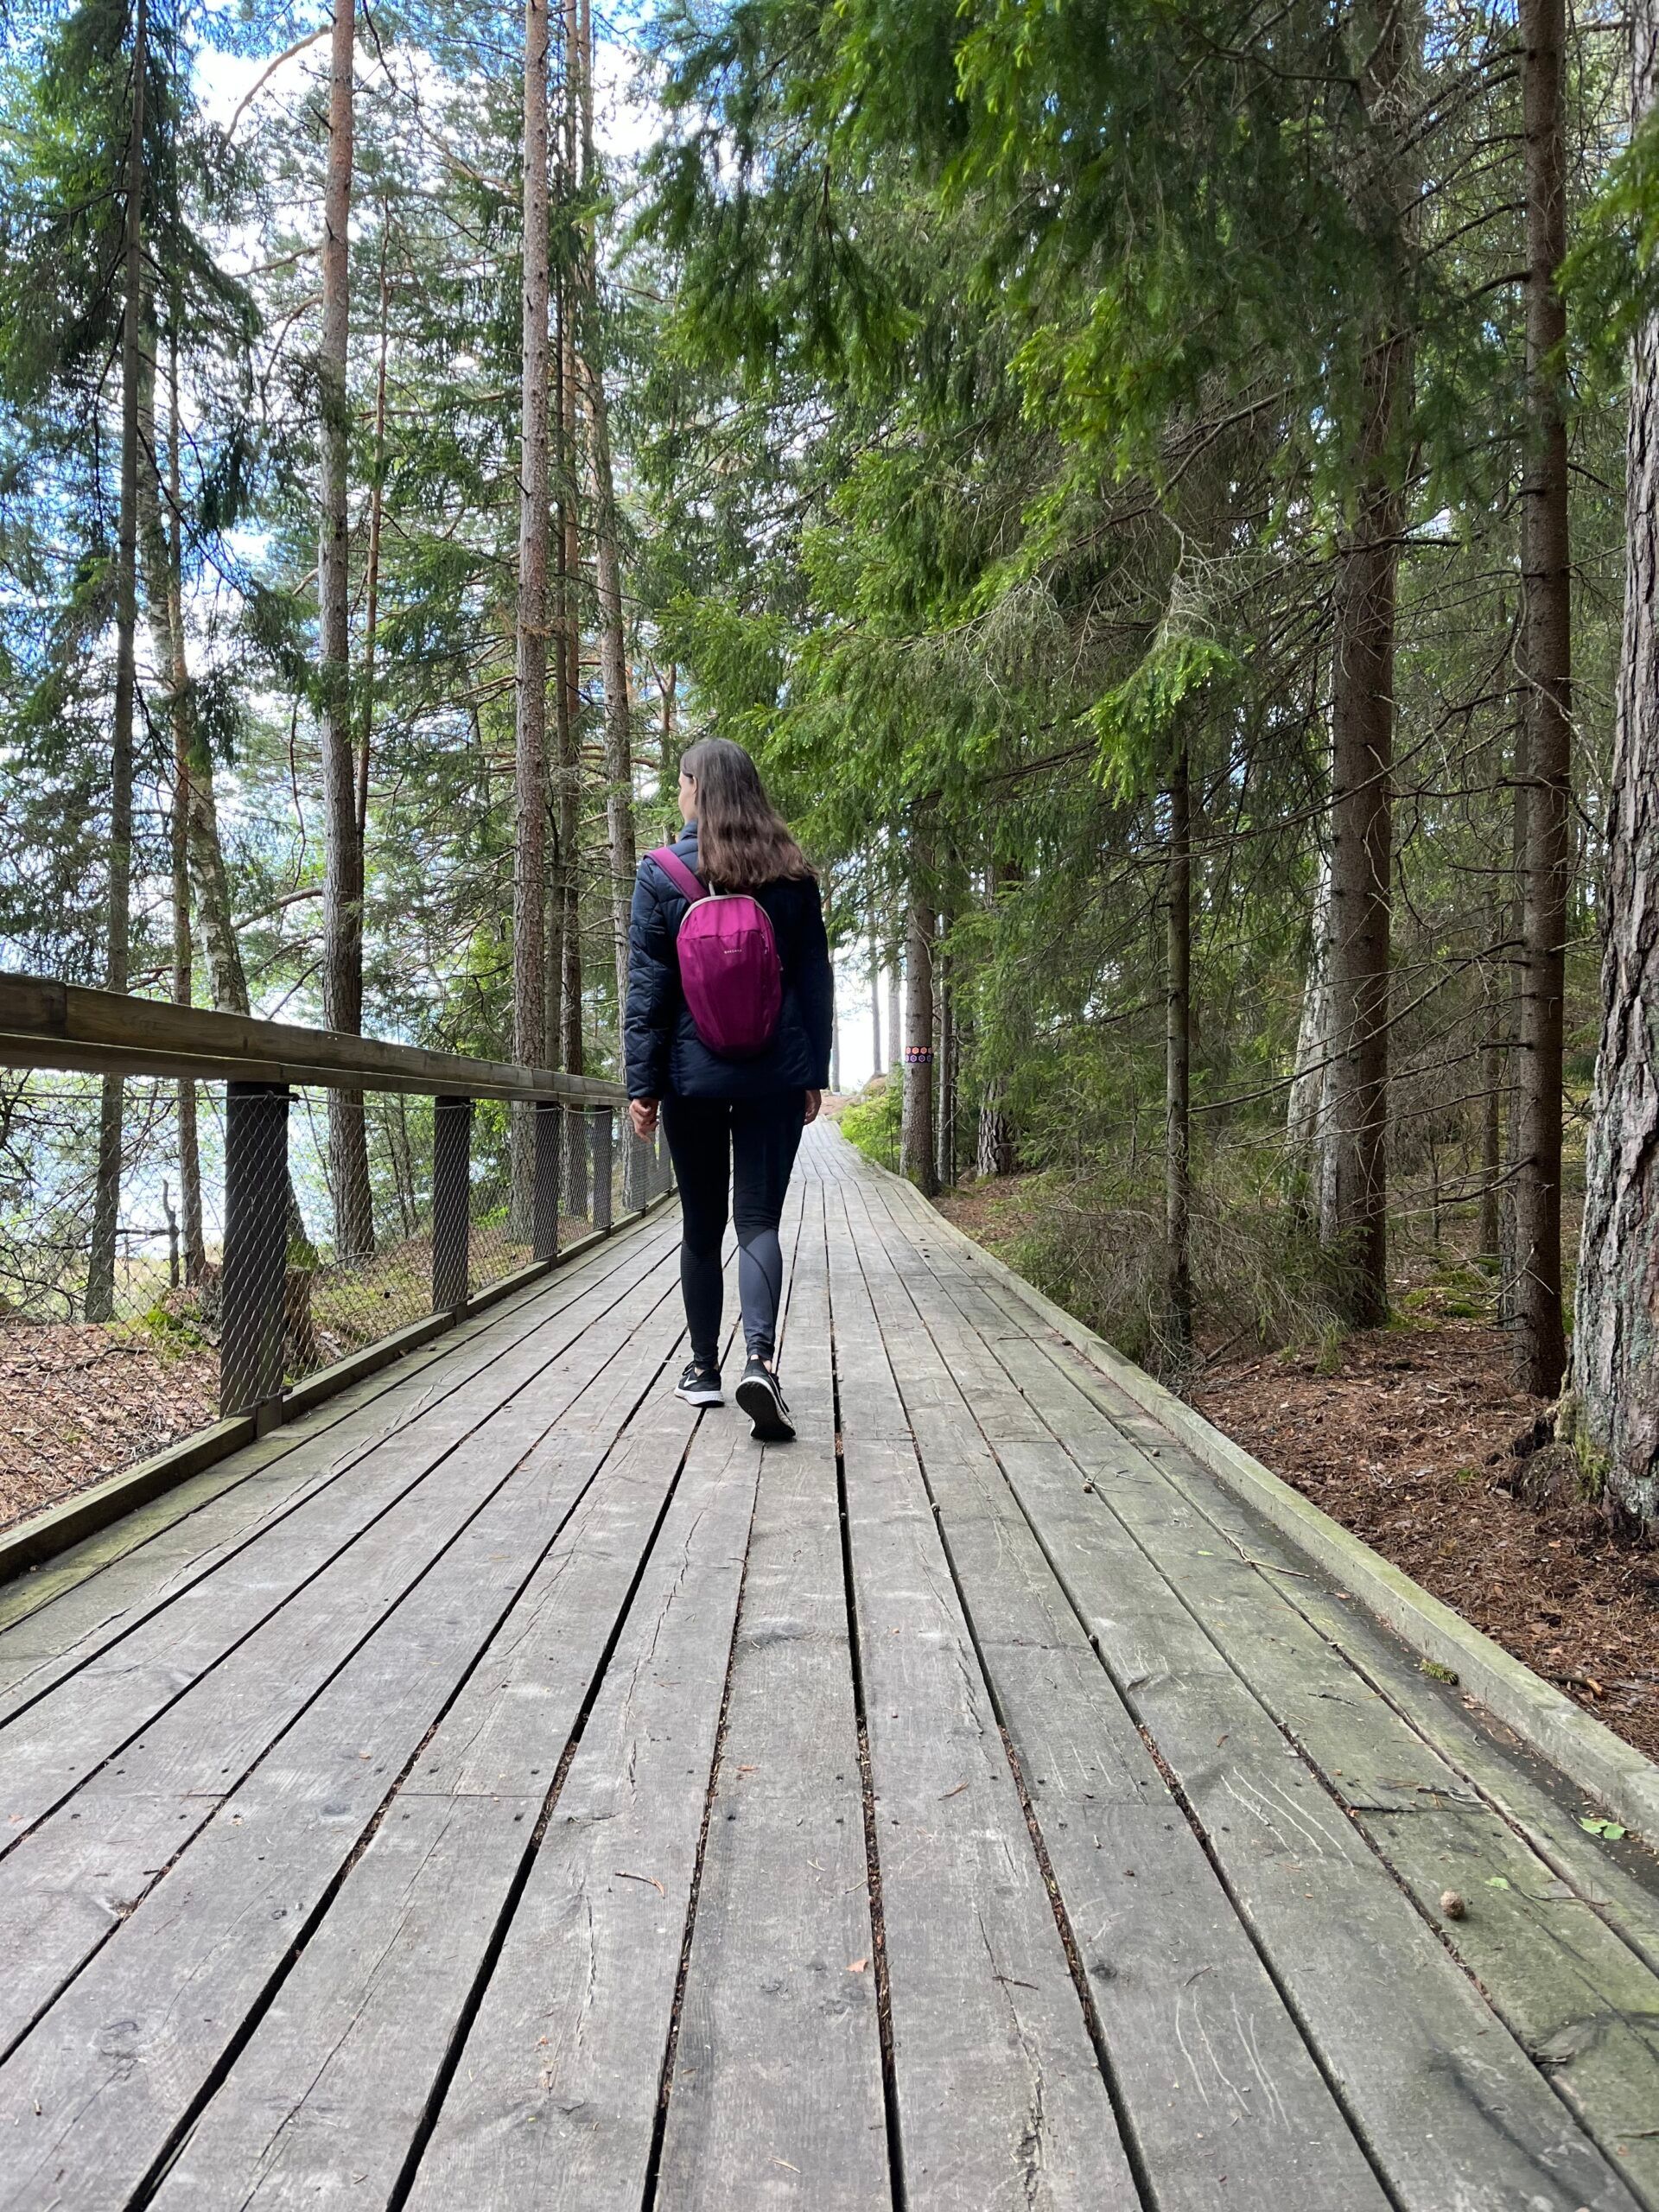 A girl walking on a wooden bridge in a forest.